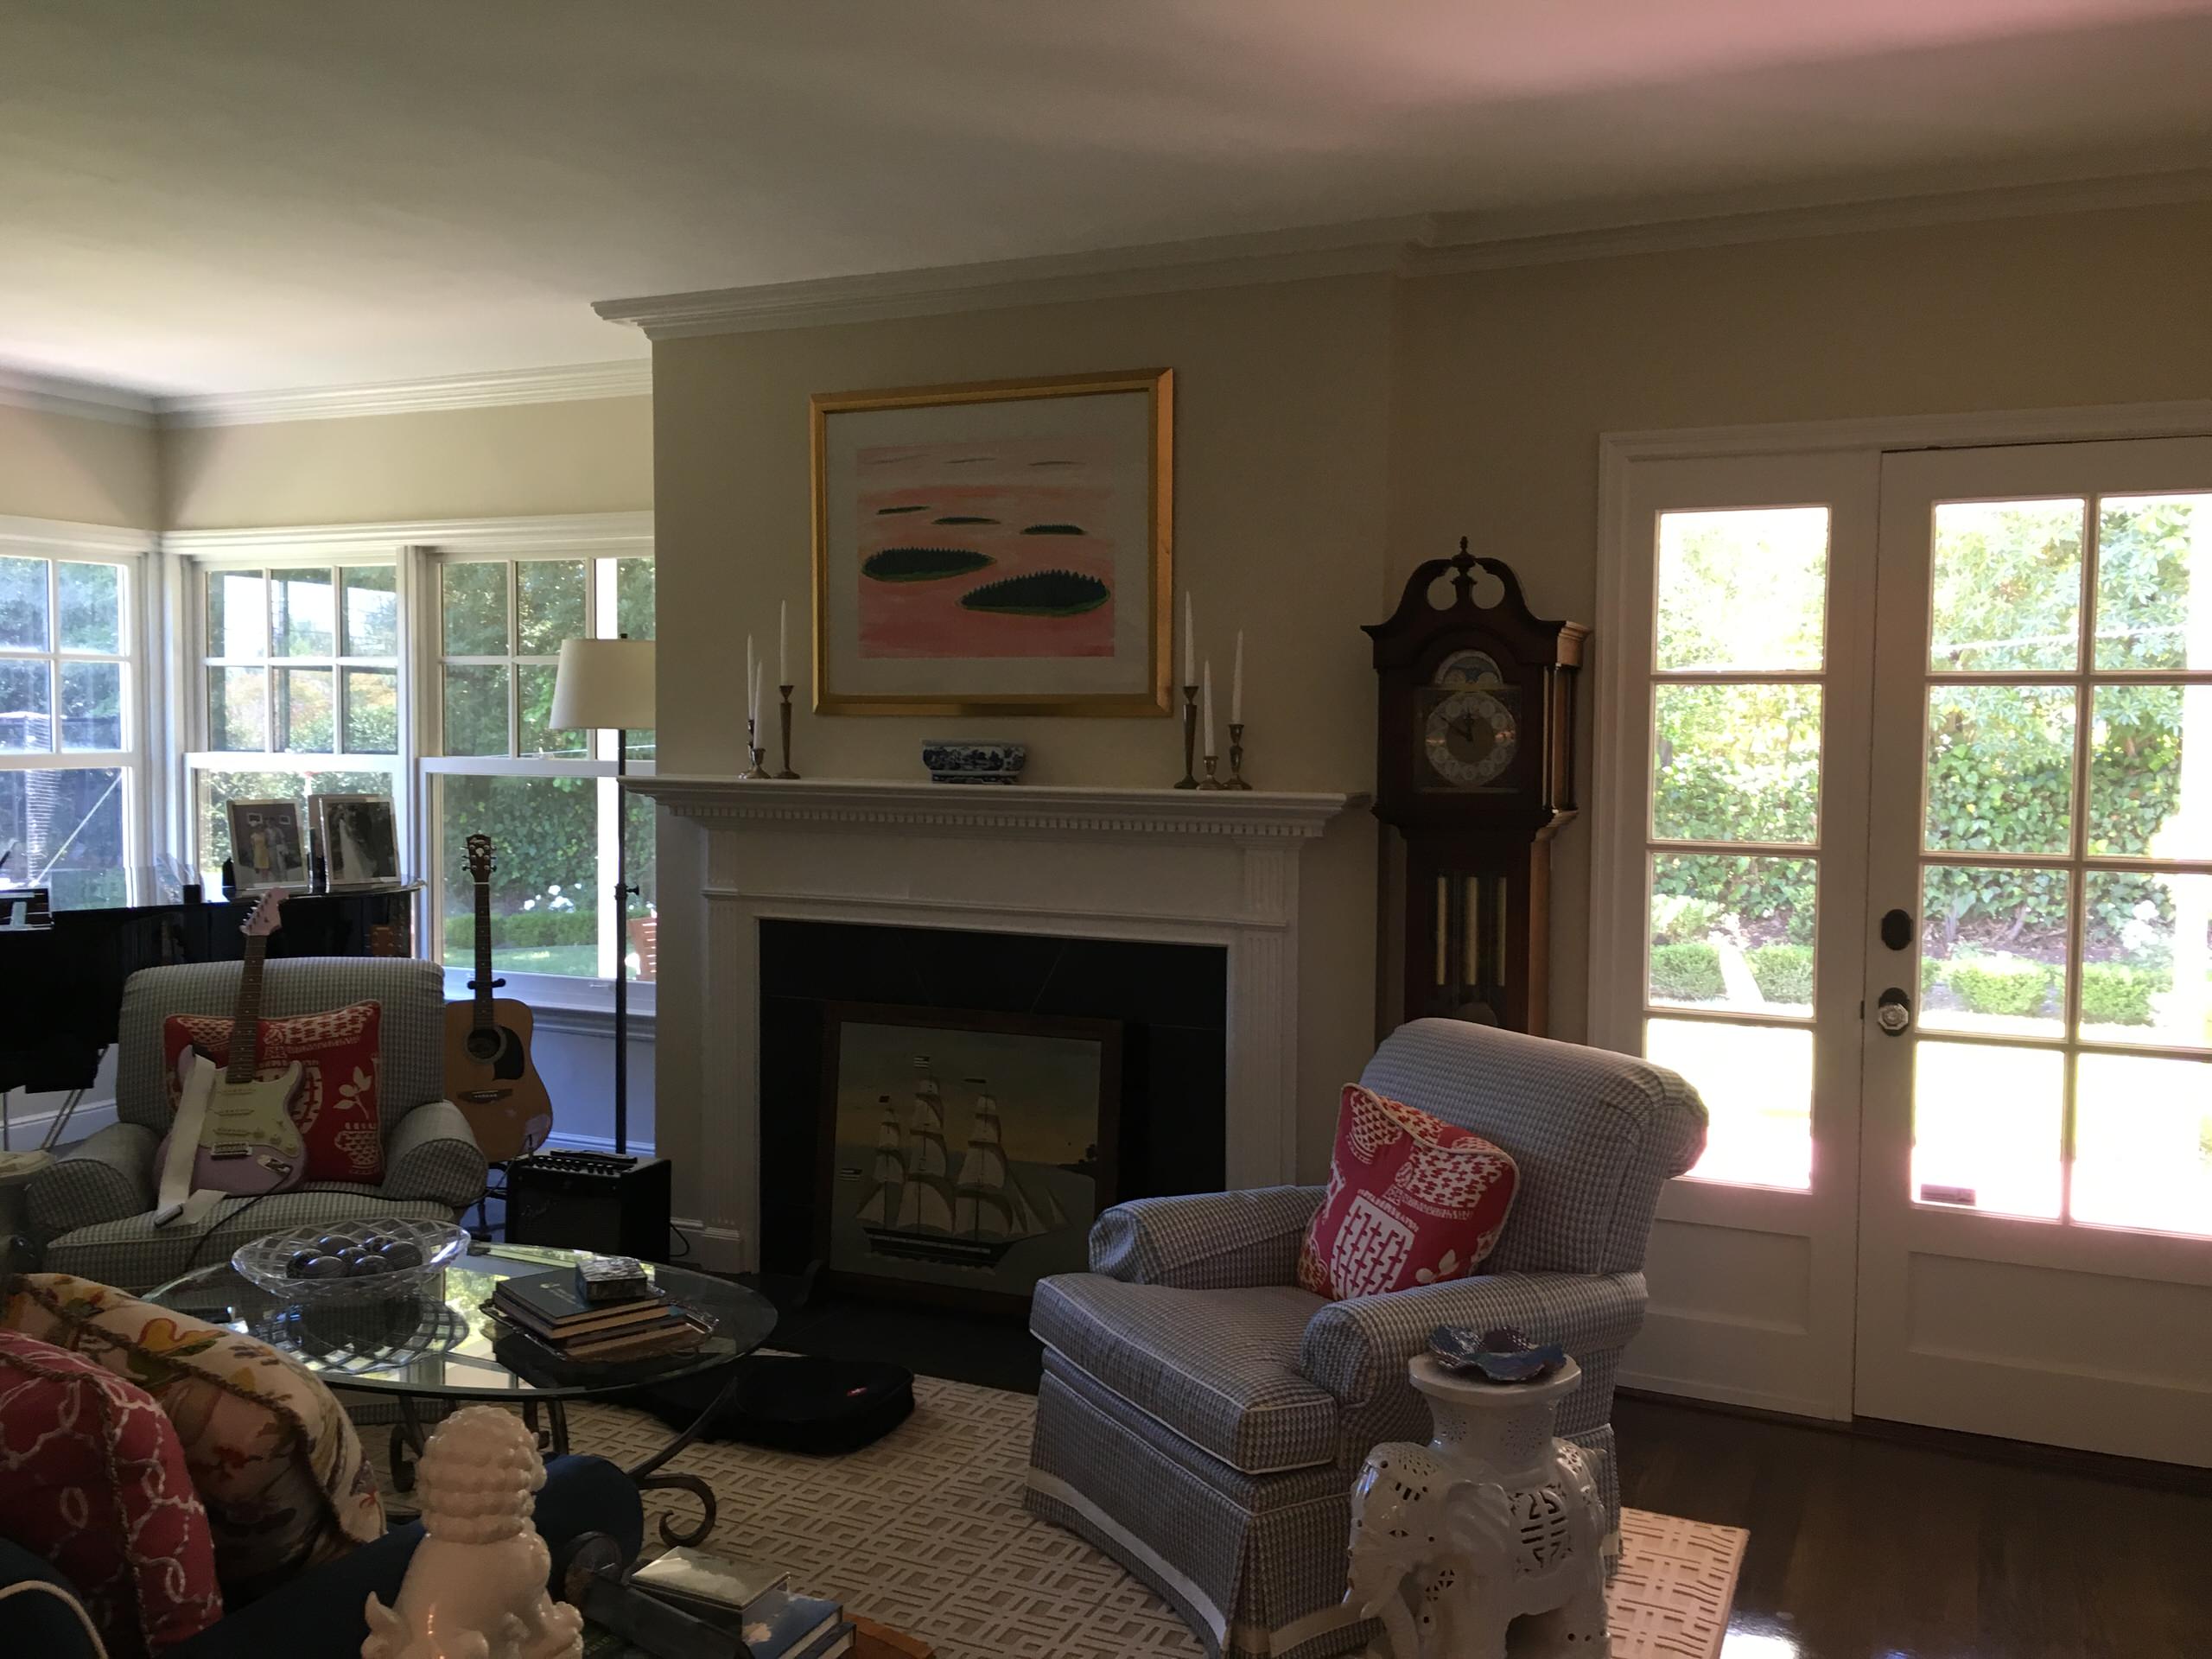 Colonial Revival - Living room, before